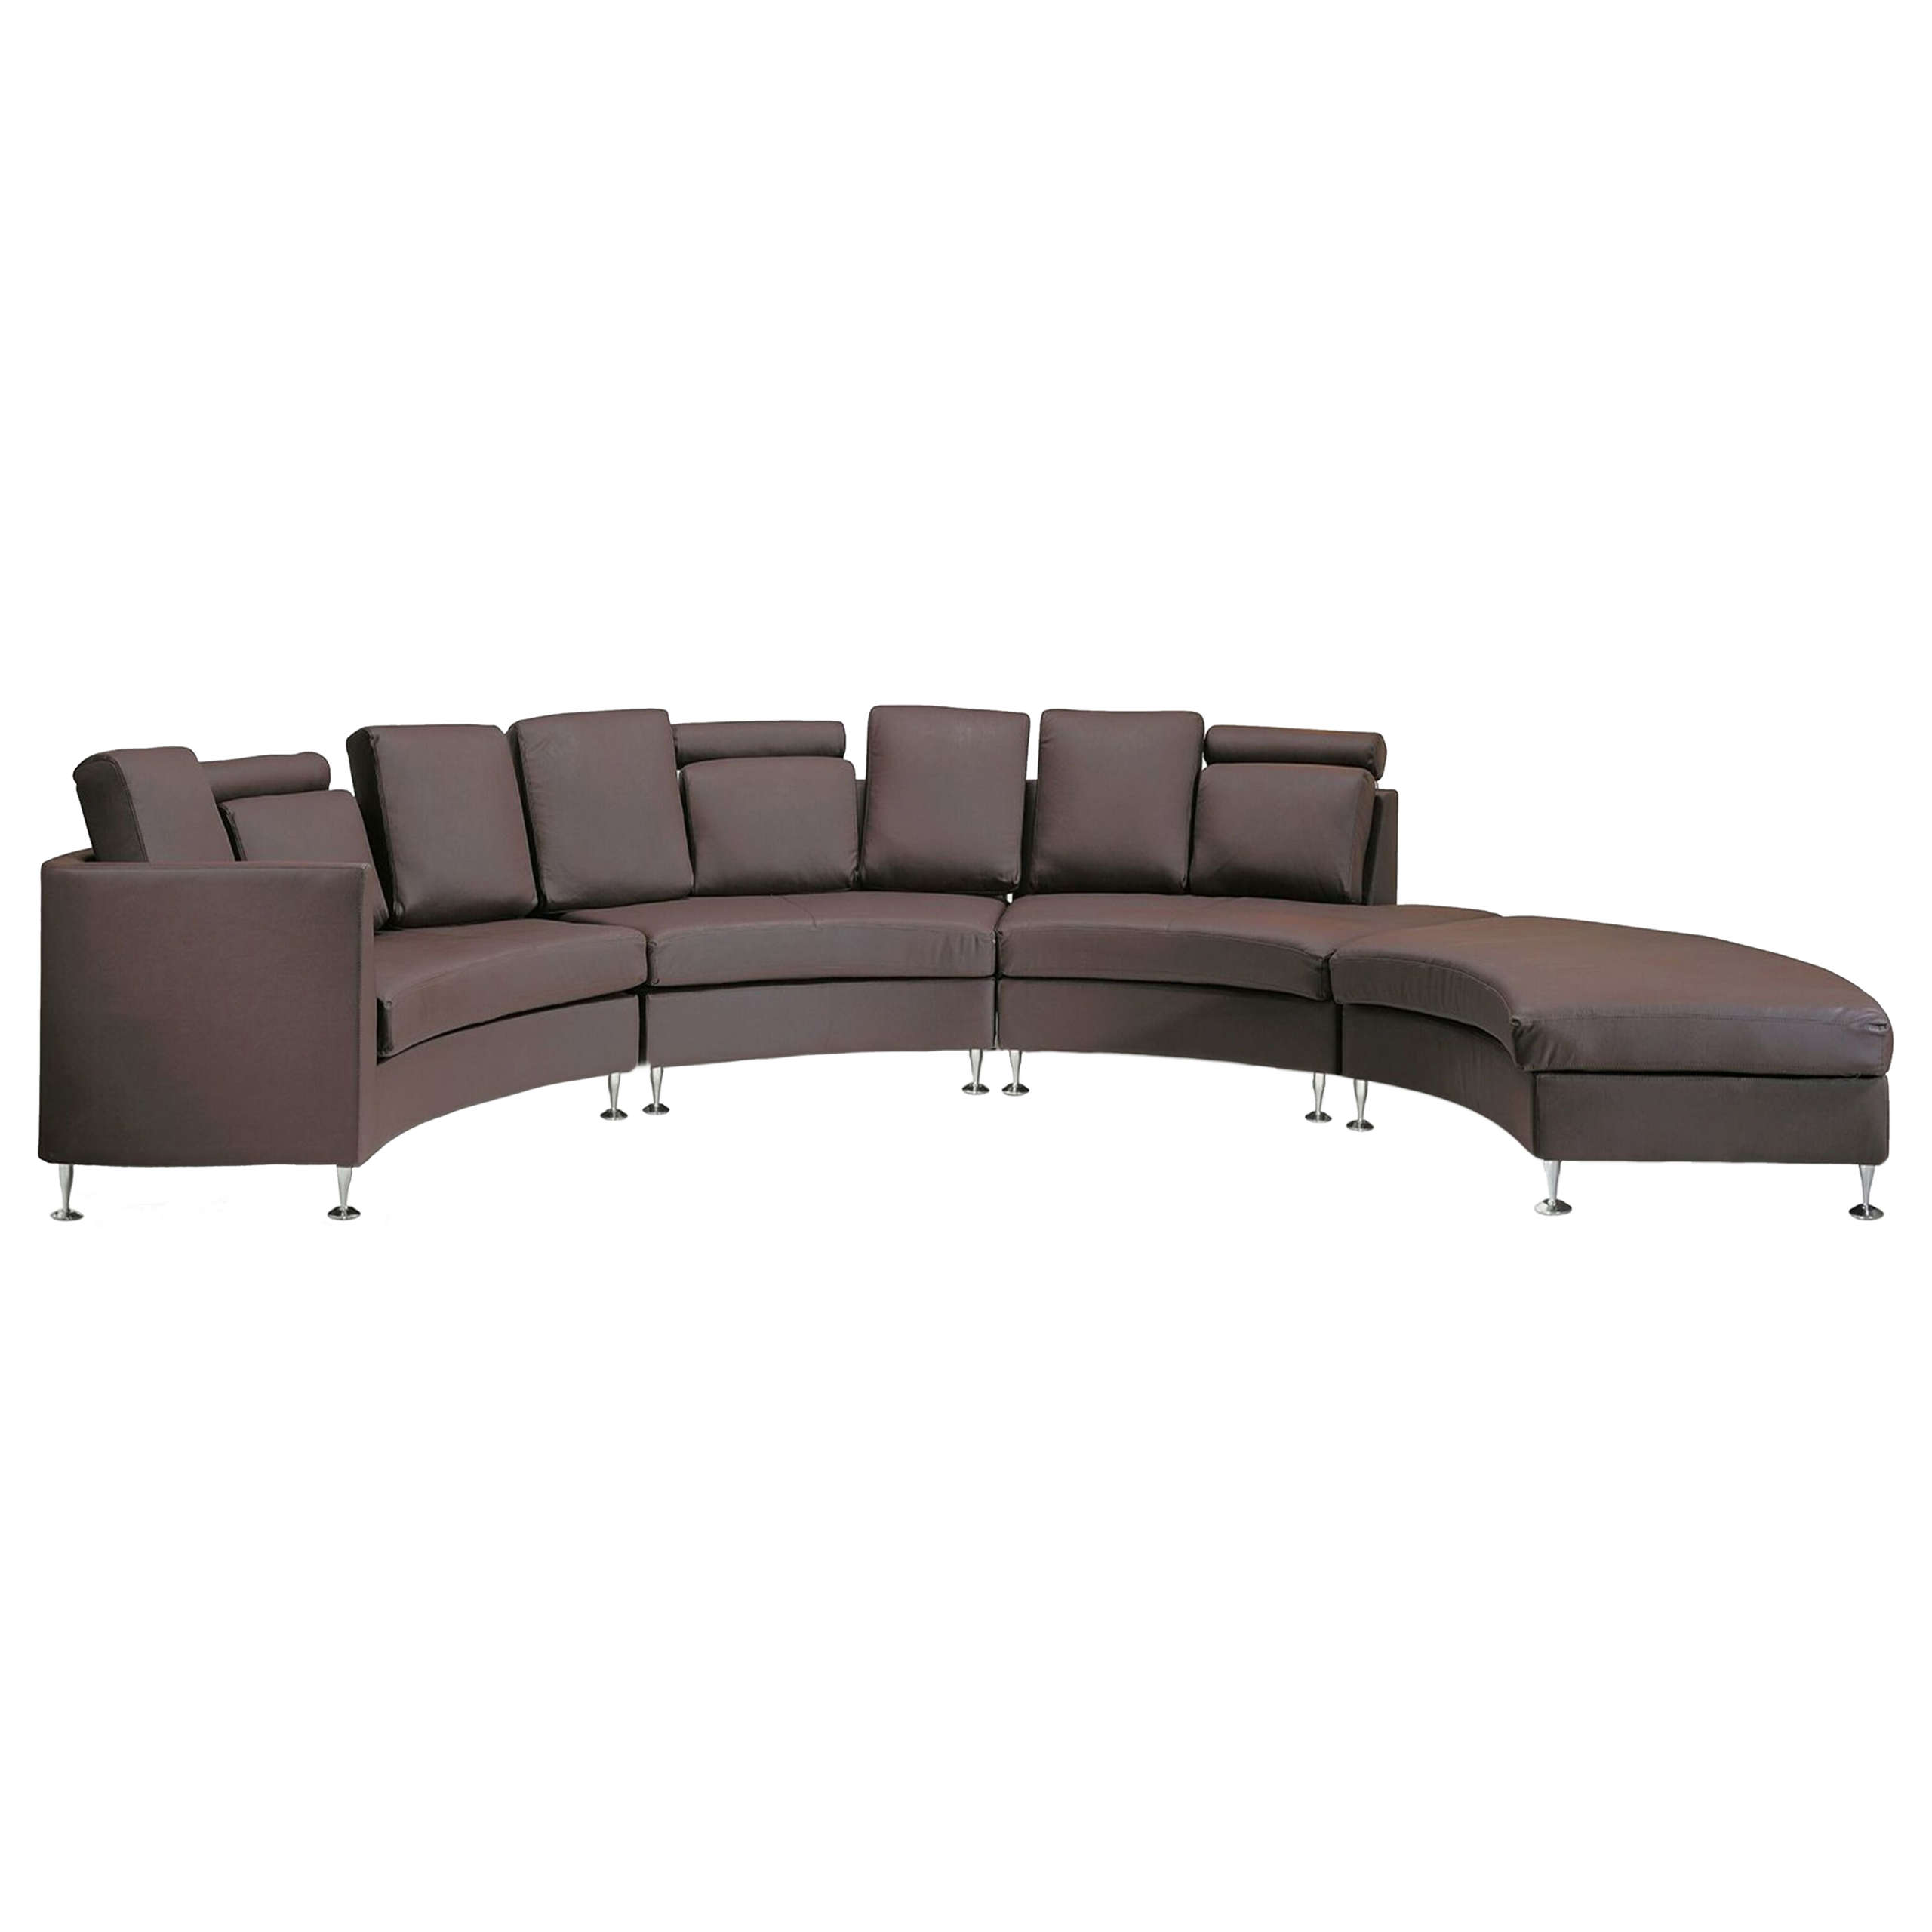 Beliani Curved Sofa Brown Faux Leather Modular 8-Seater Adjustable Headrests Modern